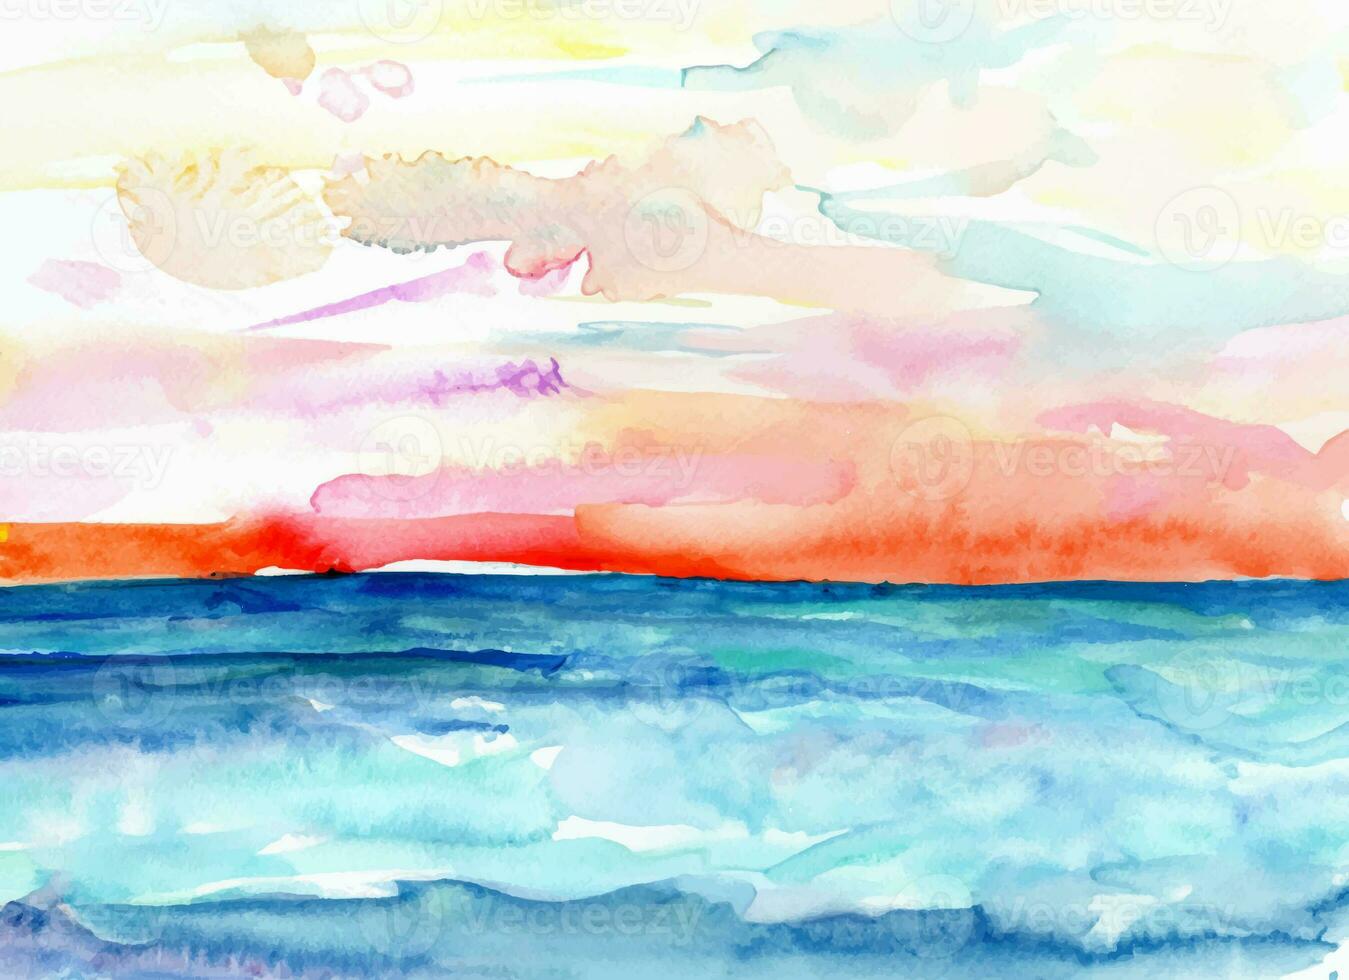 Watercolor texture background photo